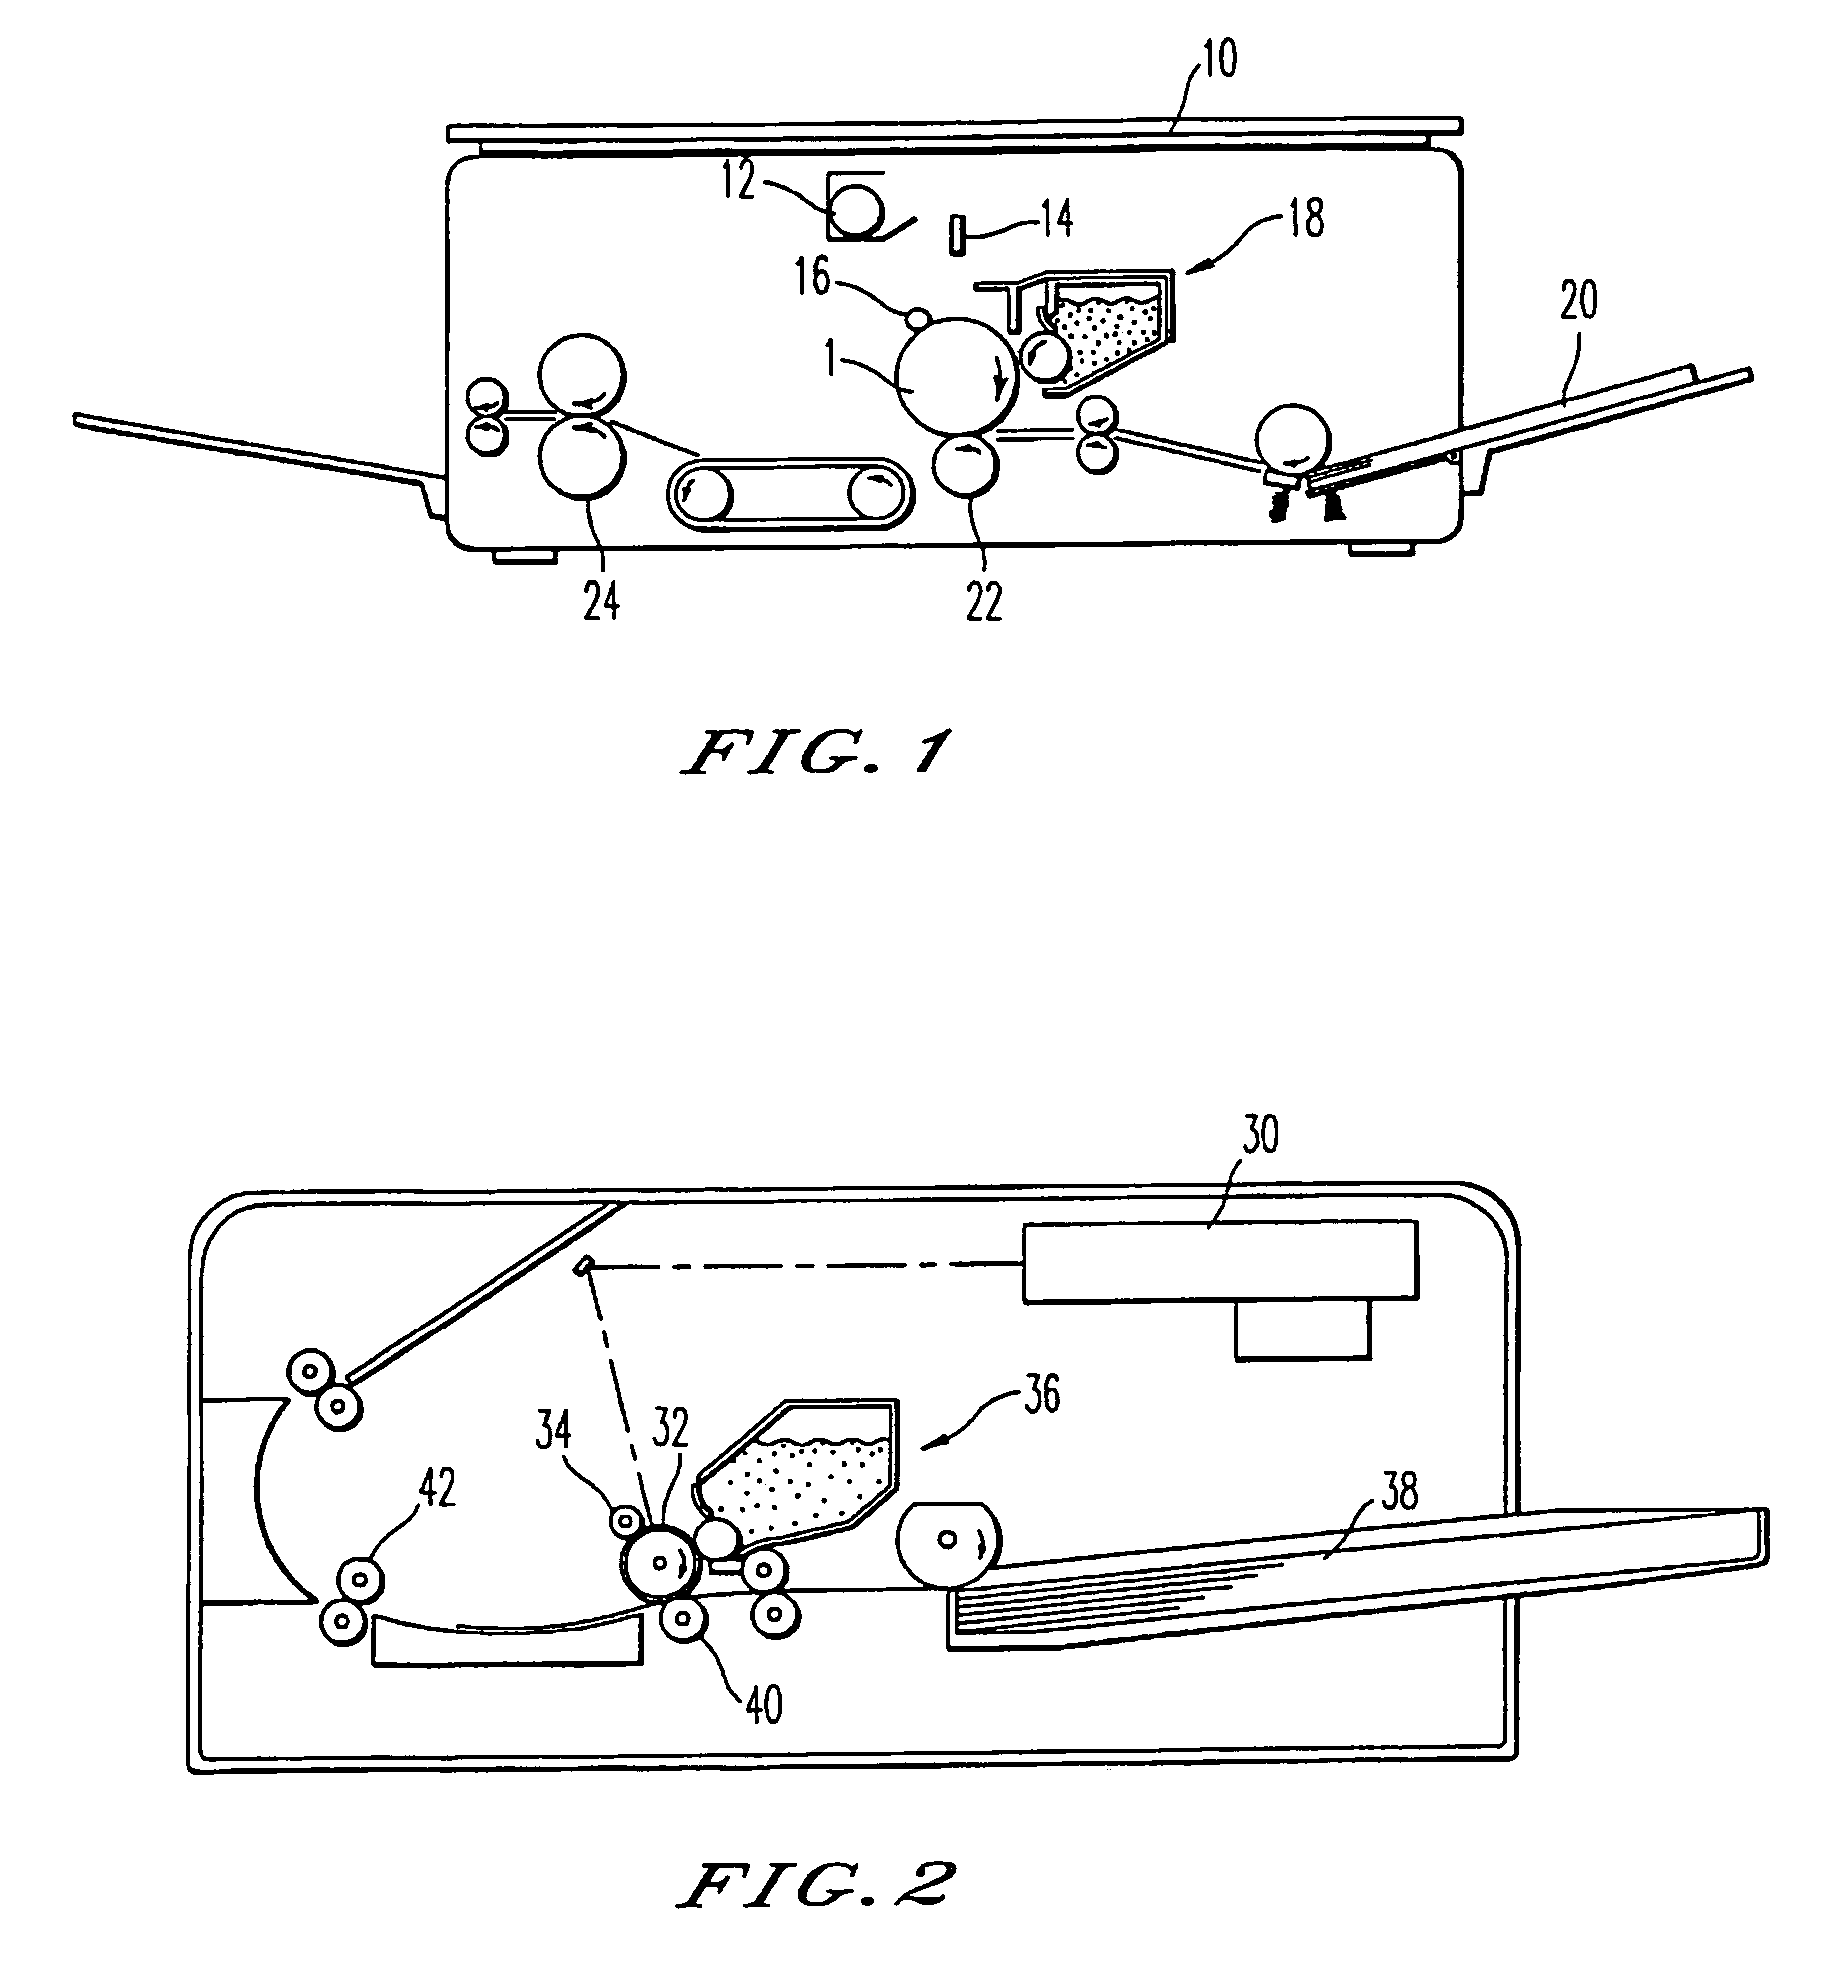 Grounding plate assembly for a drum in an image forming apparatus